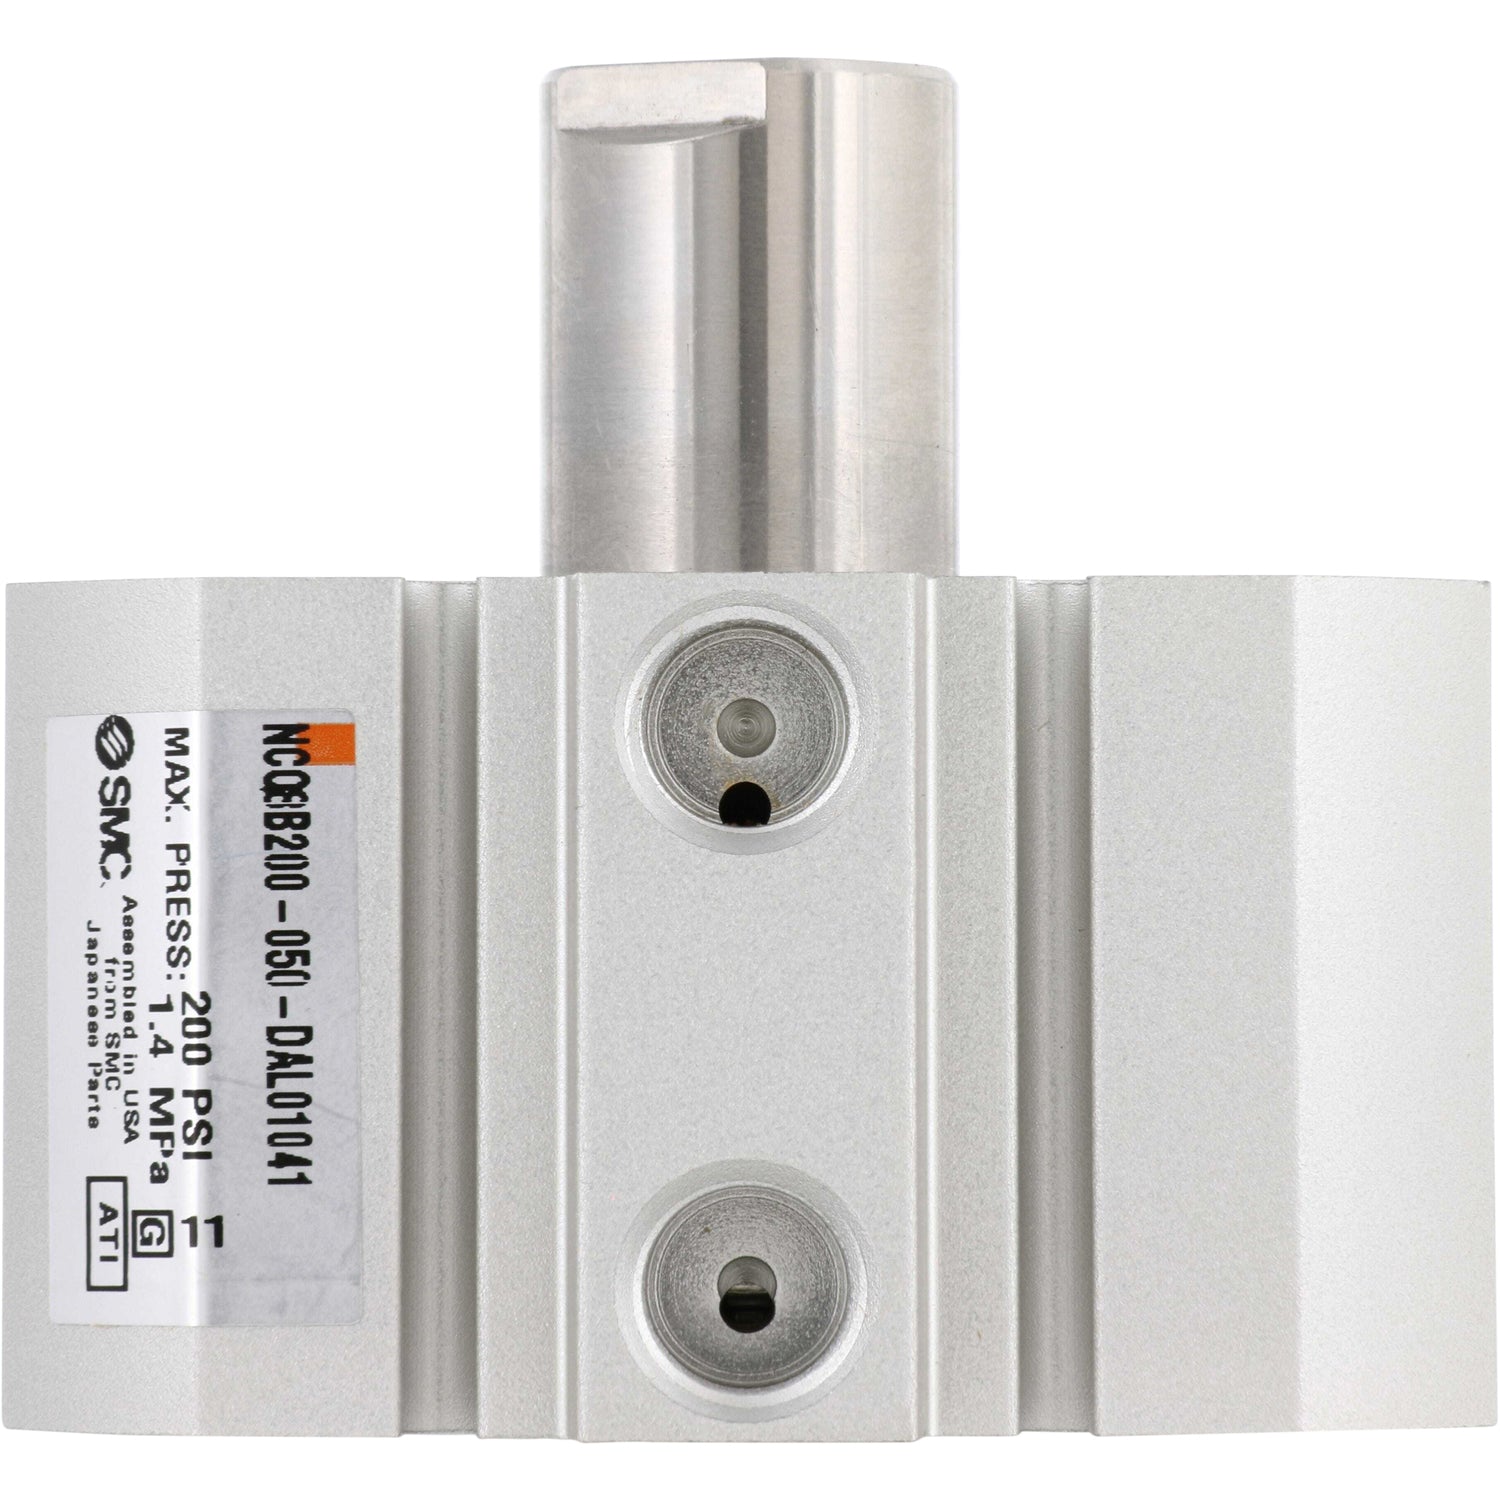 Grey rectangular pneumatic cylinder with two threaded holes on one of the sides. Part shown on white background.